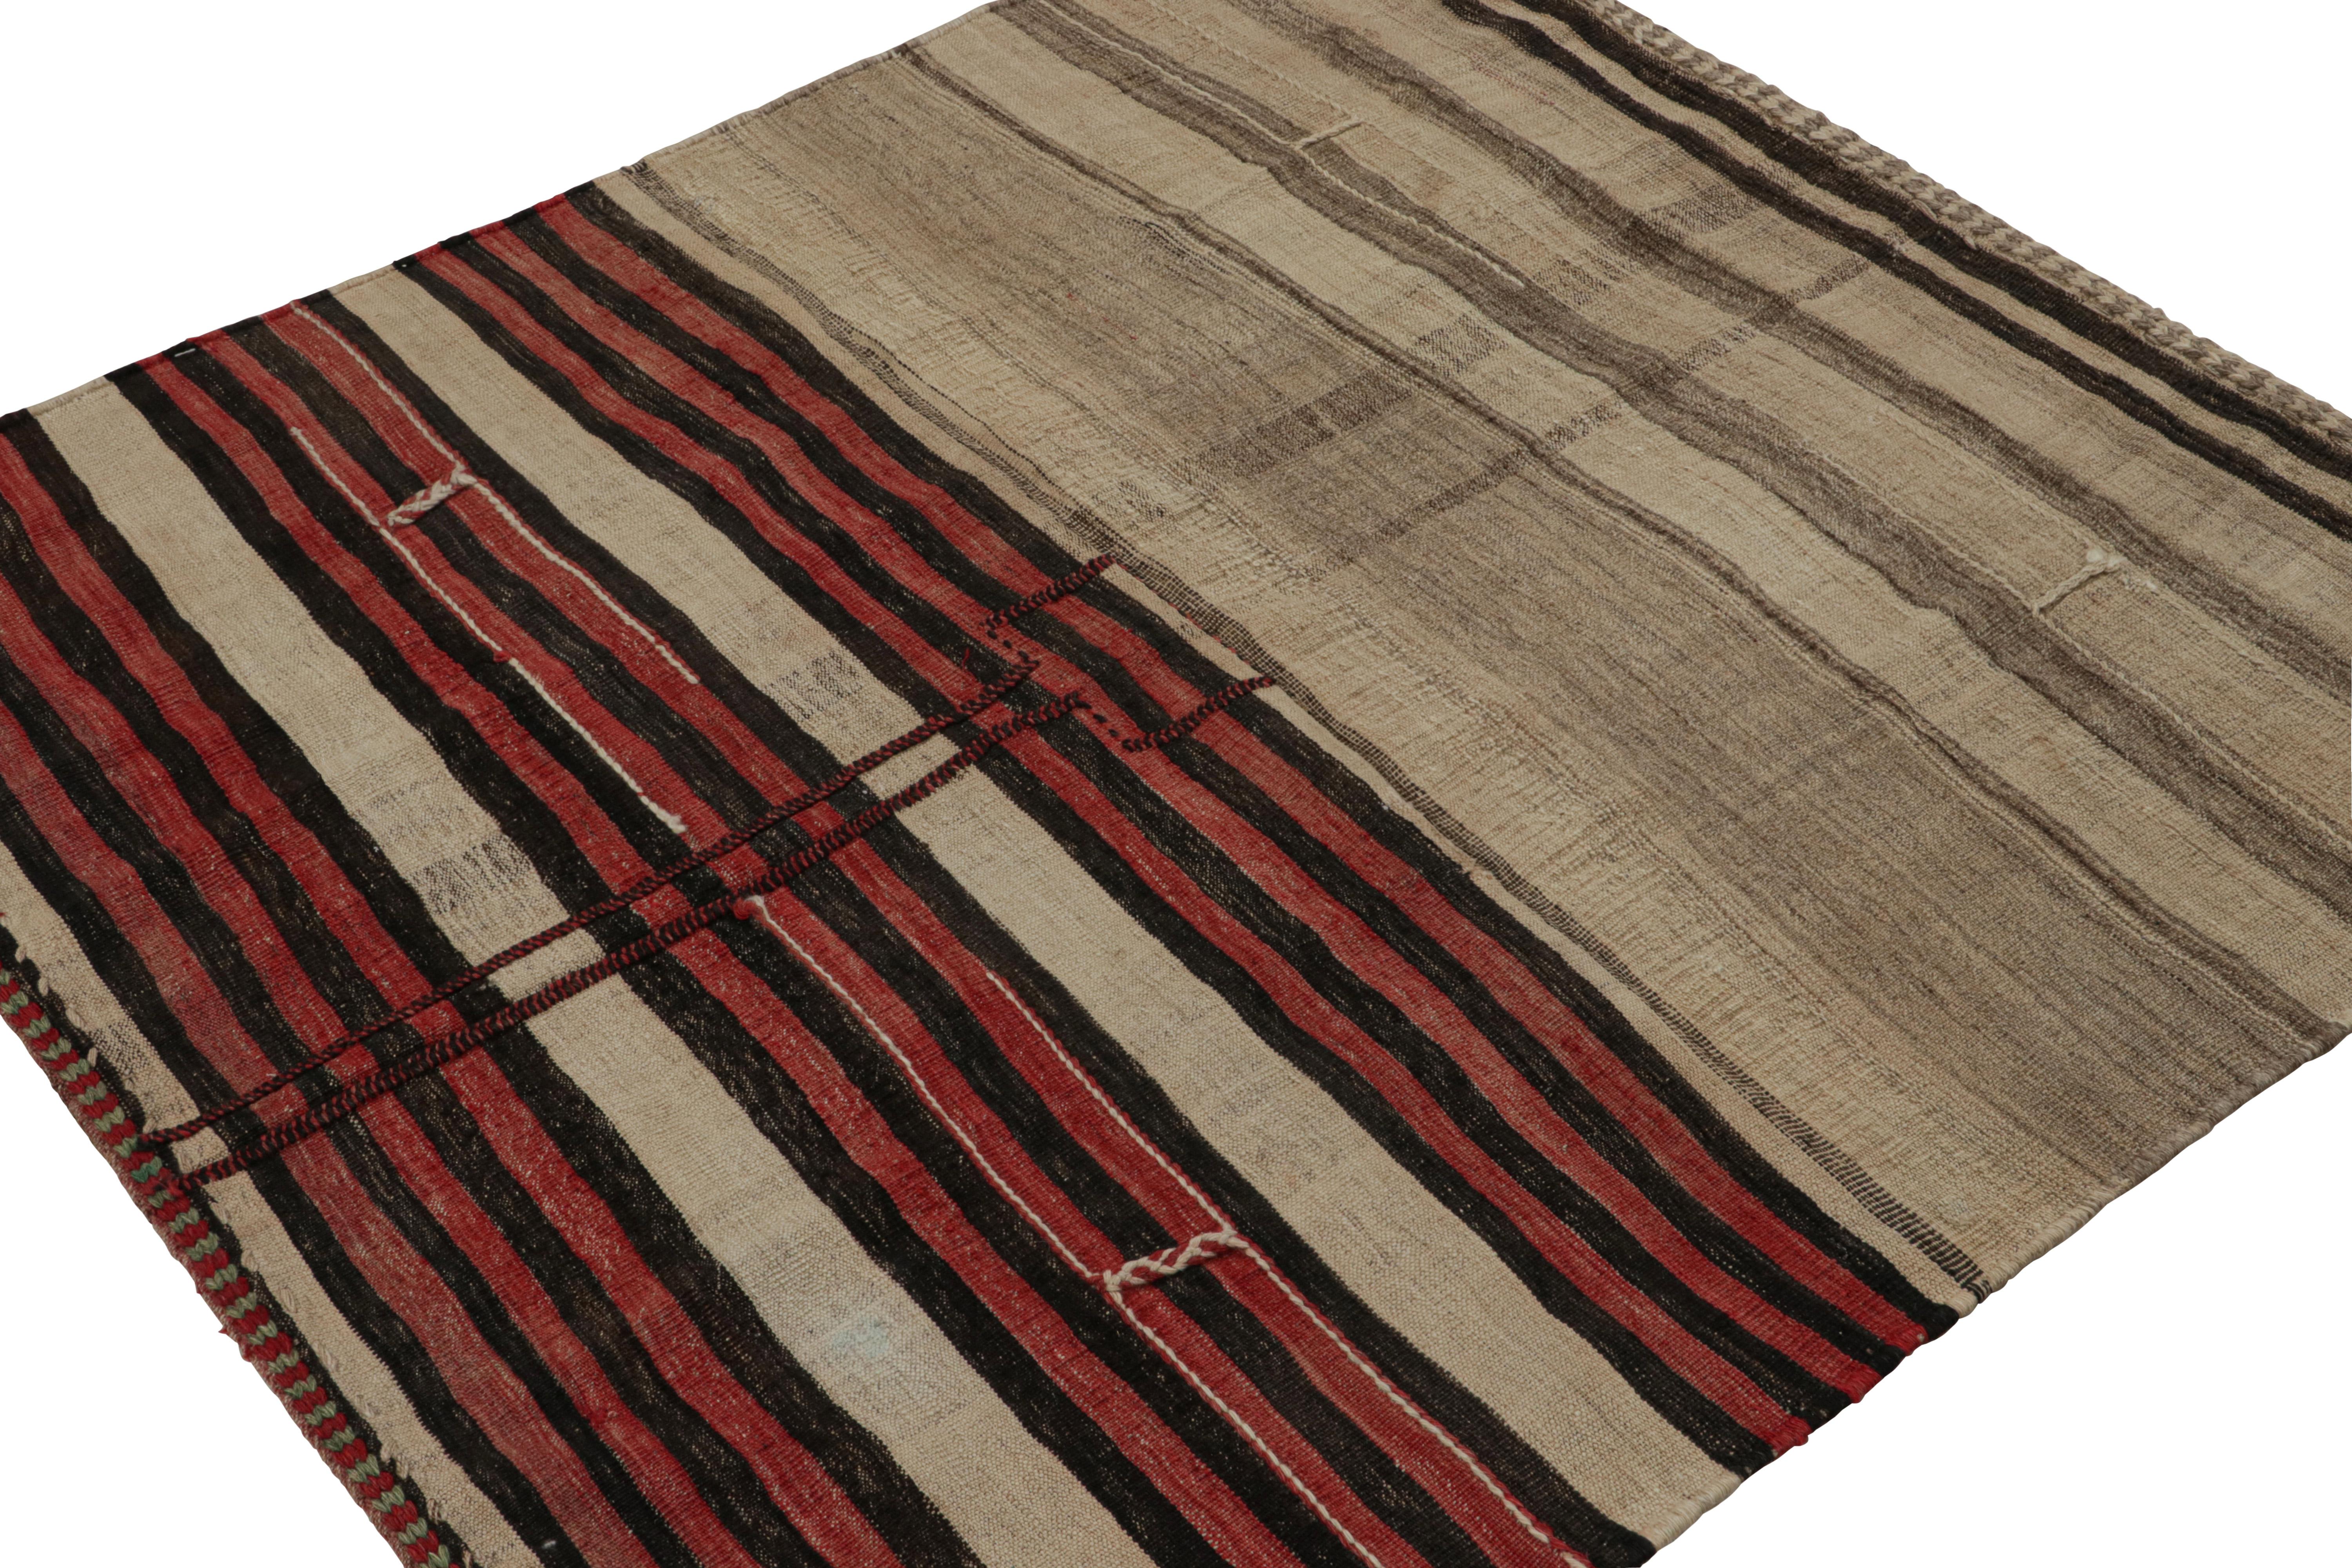 Exemplary of nomadic design, this 6x9 vintage Afghan tribal kilim rug, handwoven in wool with a red field, features a rare design with large scale patterns and vibrant colorway. 

On the design: 

Connoisseurs will admire the design of this kilim as